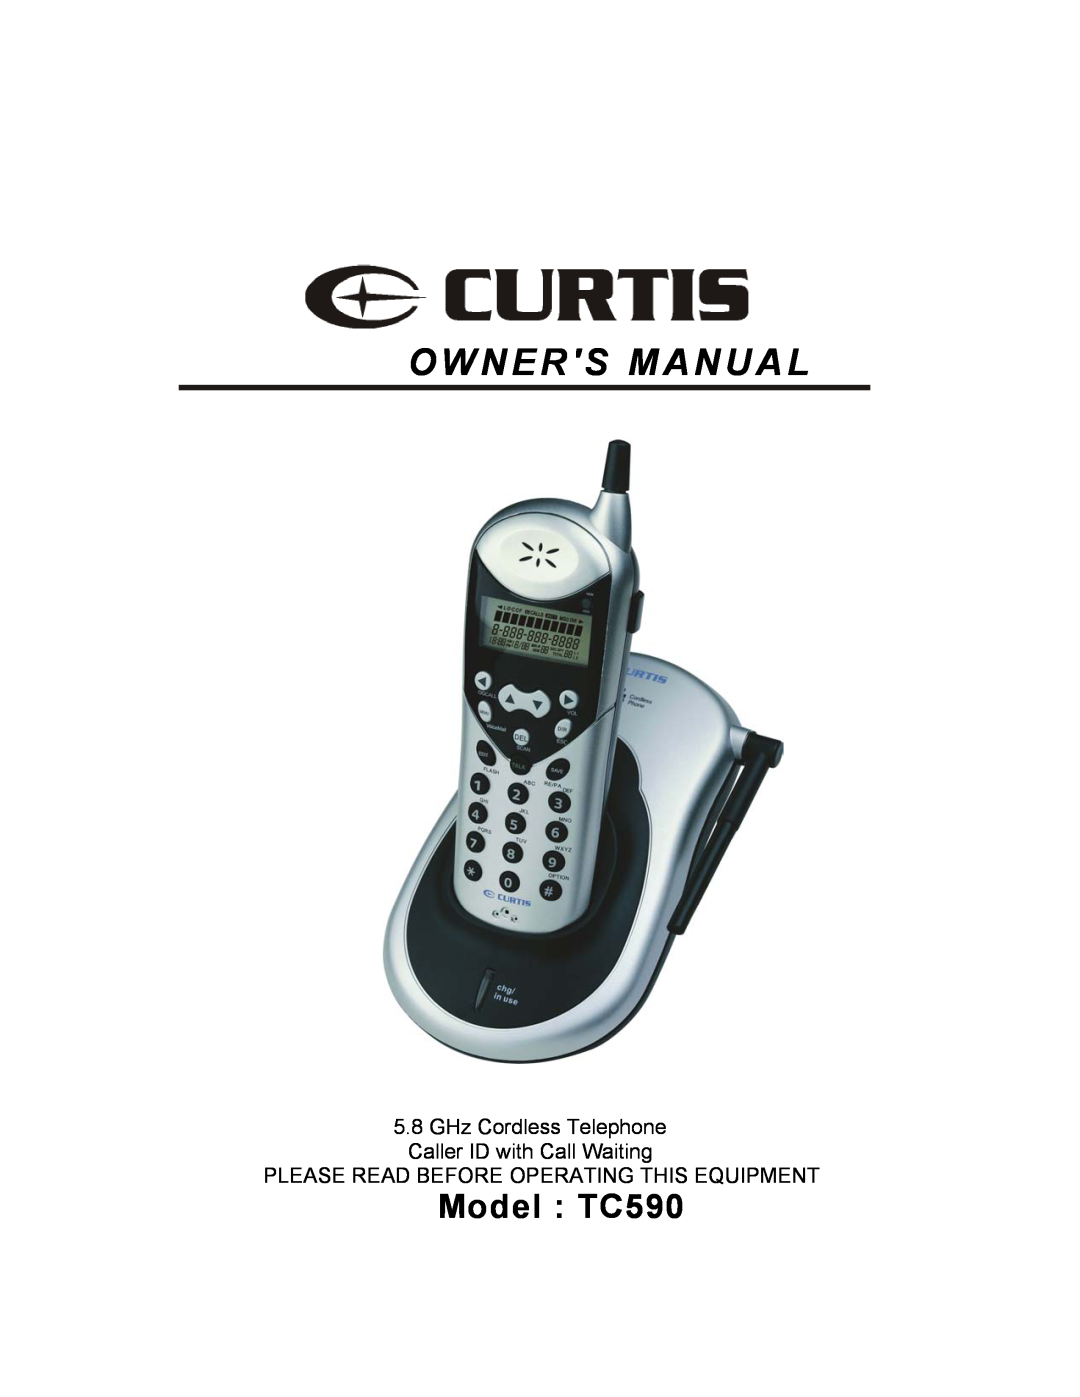 Curtis owner manual Owners Manual, Model TC590, GHz Cordless Telephone Caller ID with Call Waiting 